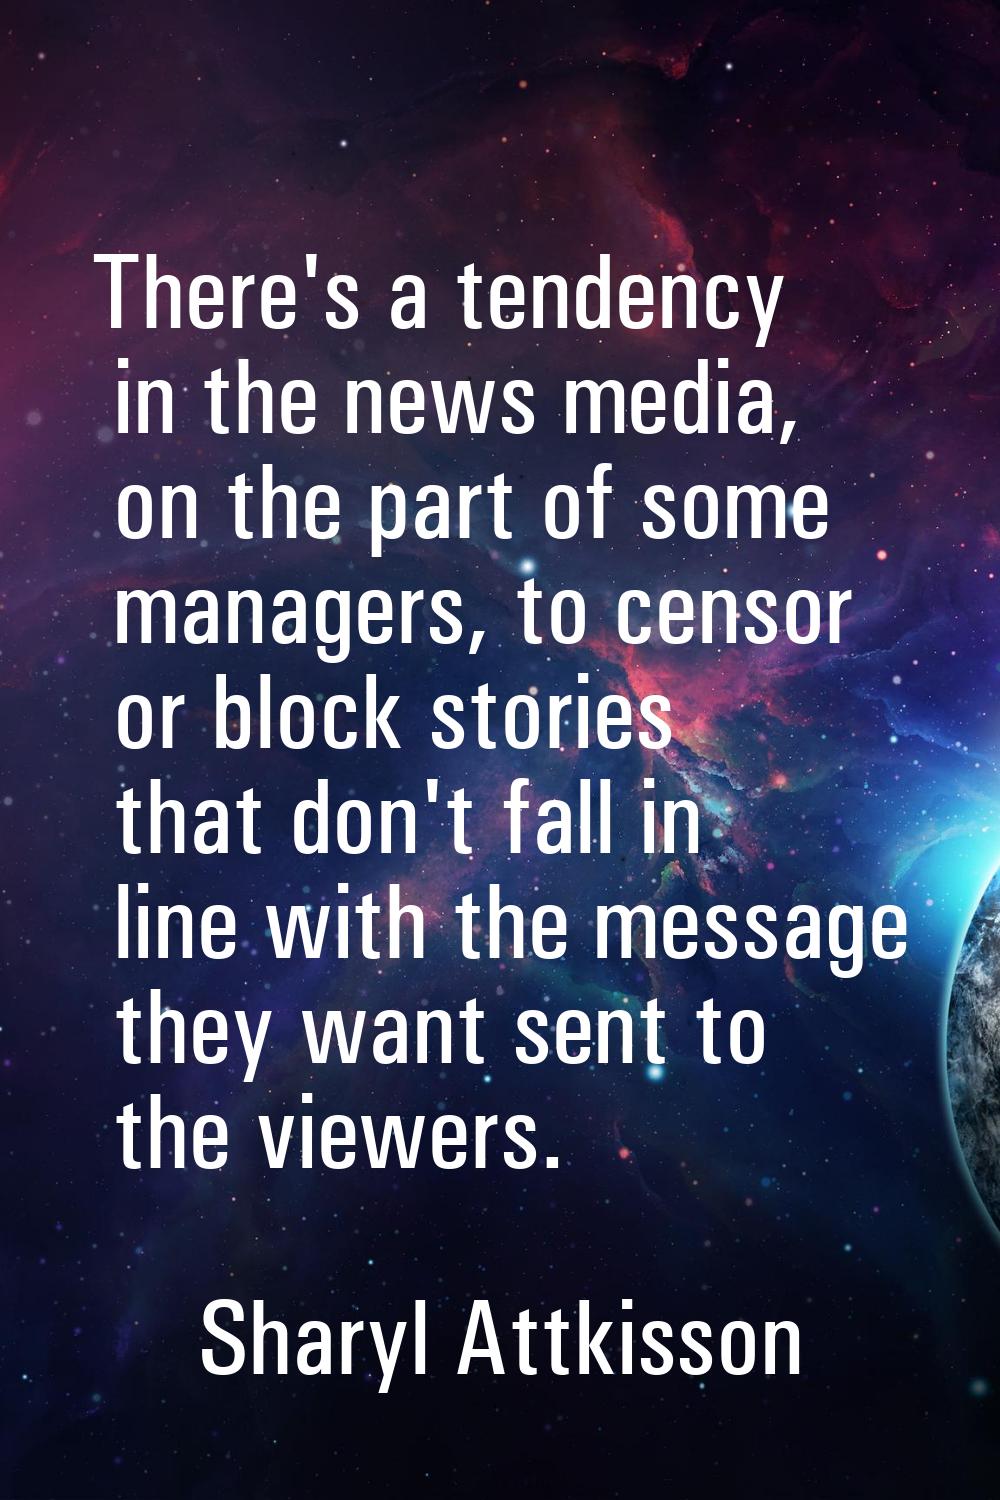 There's a tendency in the news media, on the part of some managers, to censor or block stories that